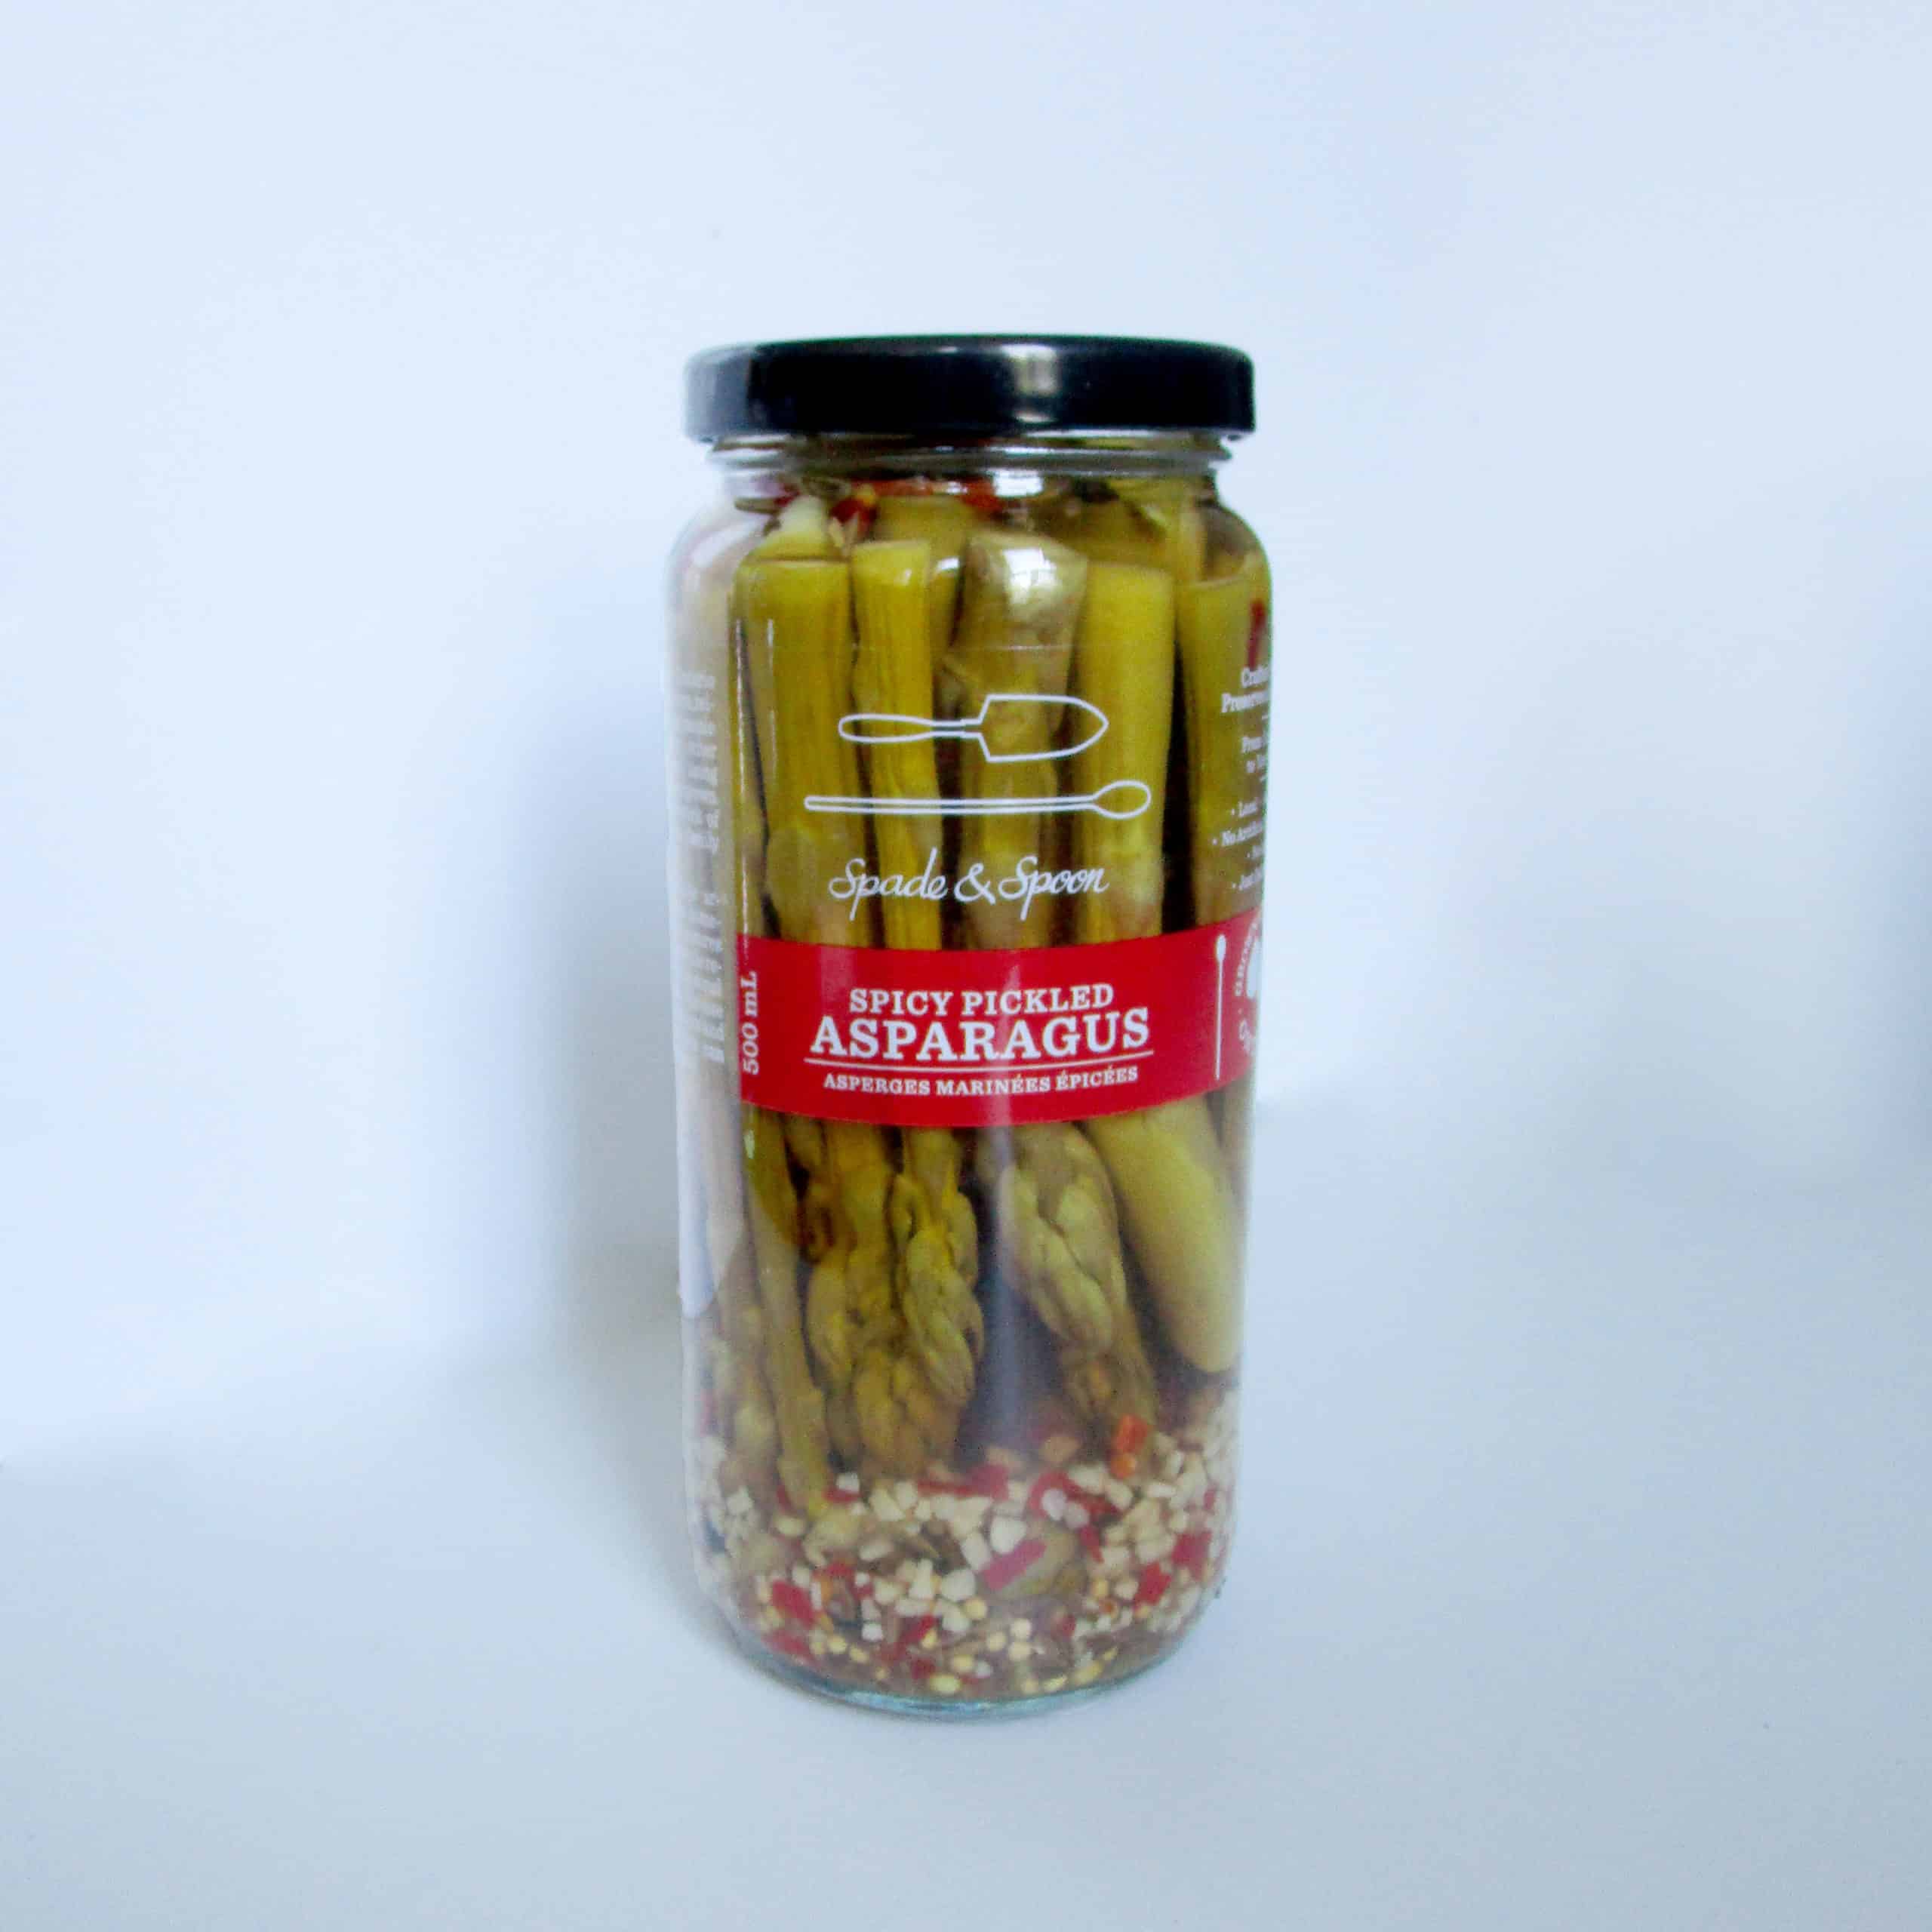 Spicy pickled asparagus